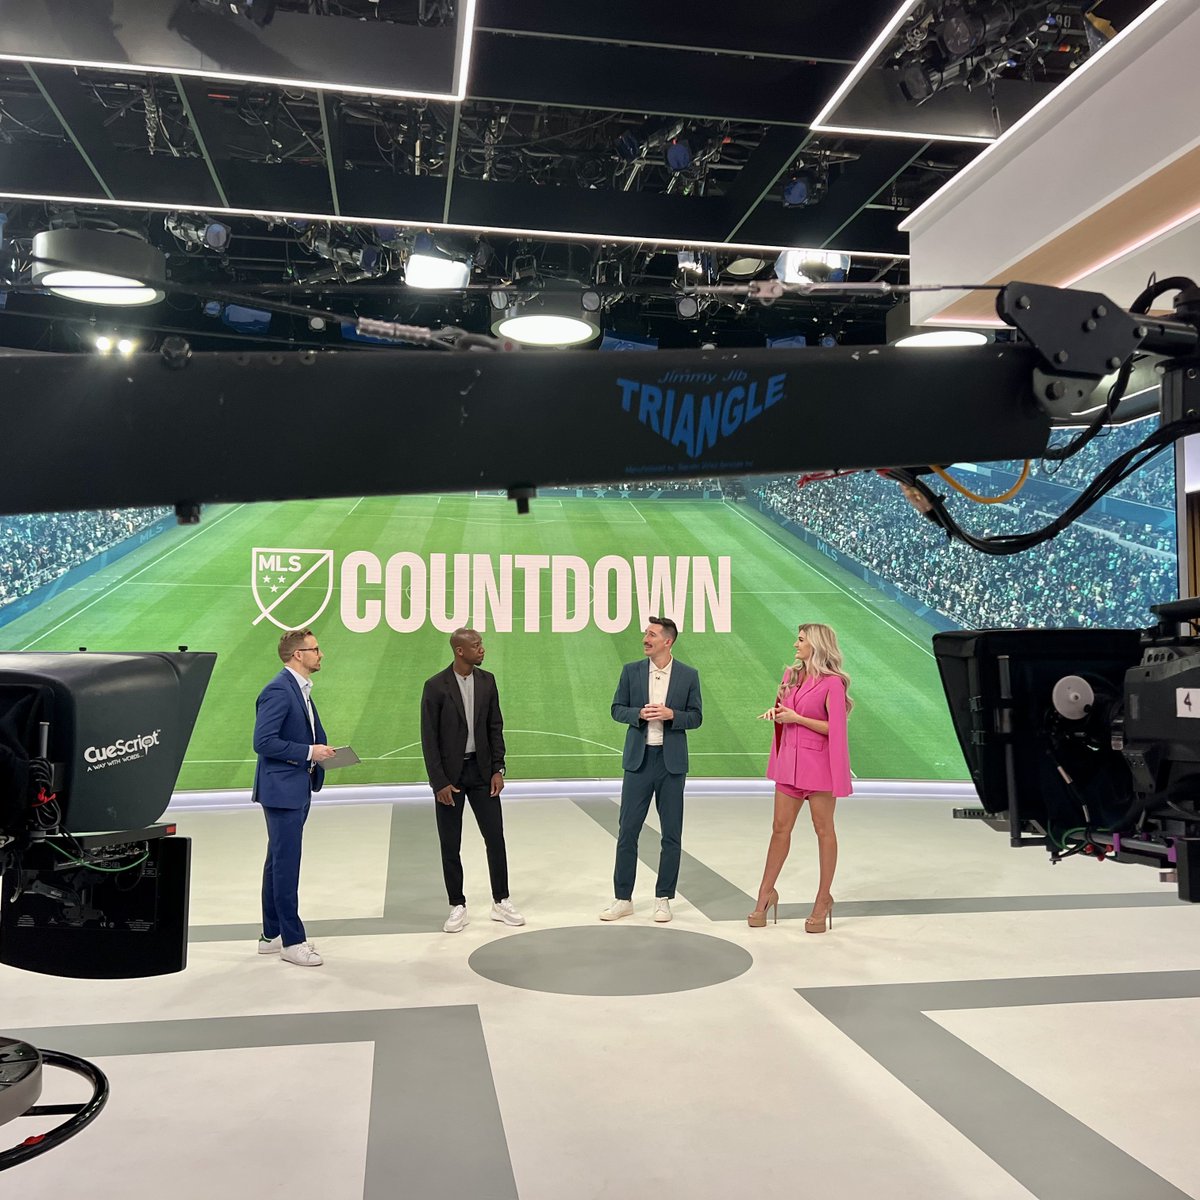 MLS 360 is underway! 

Catch our new whip-around show that will provide live look-ins and analysis of all the key moments from every match.